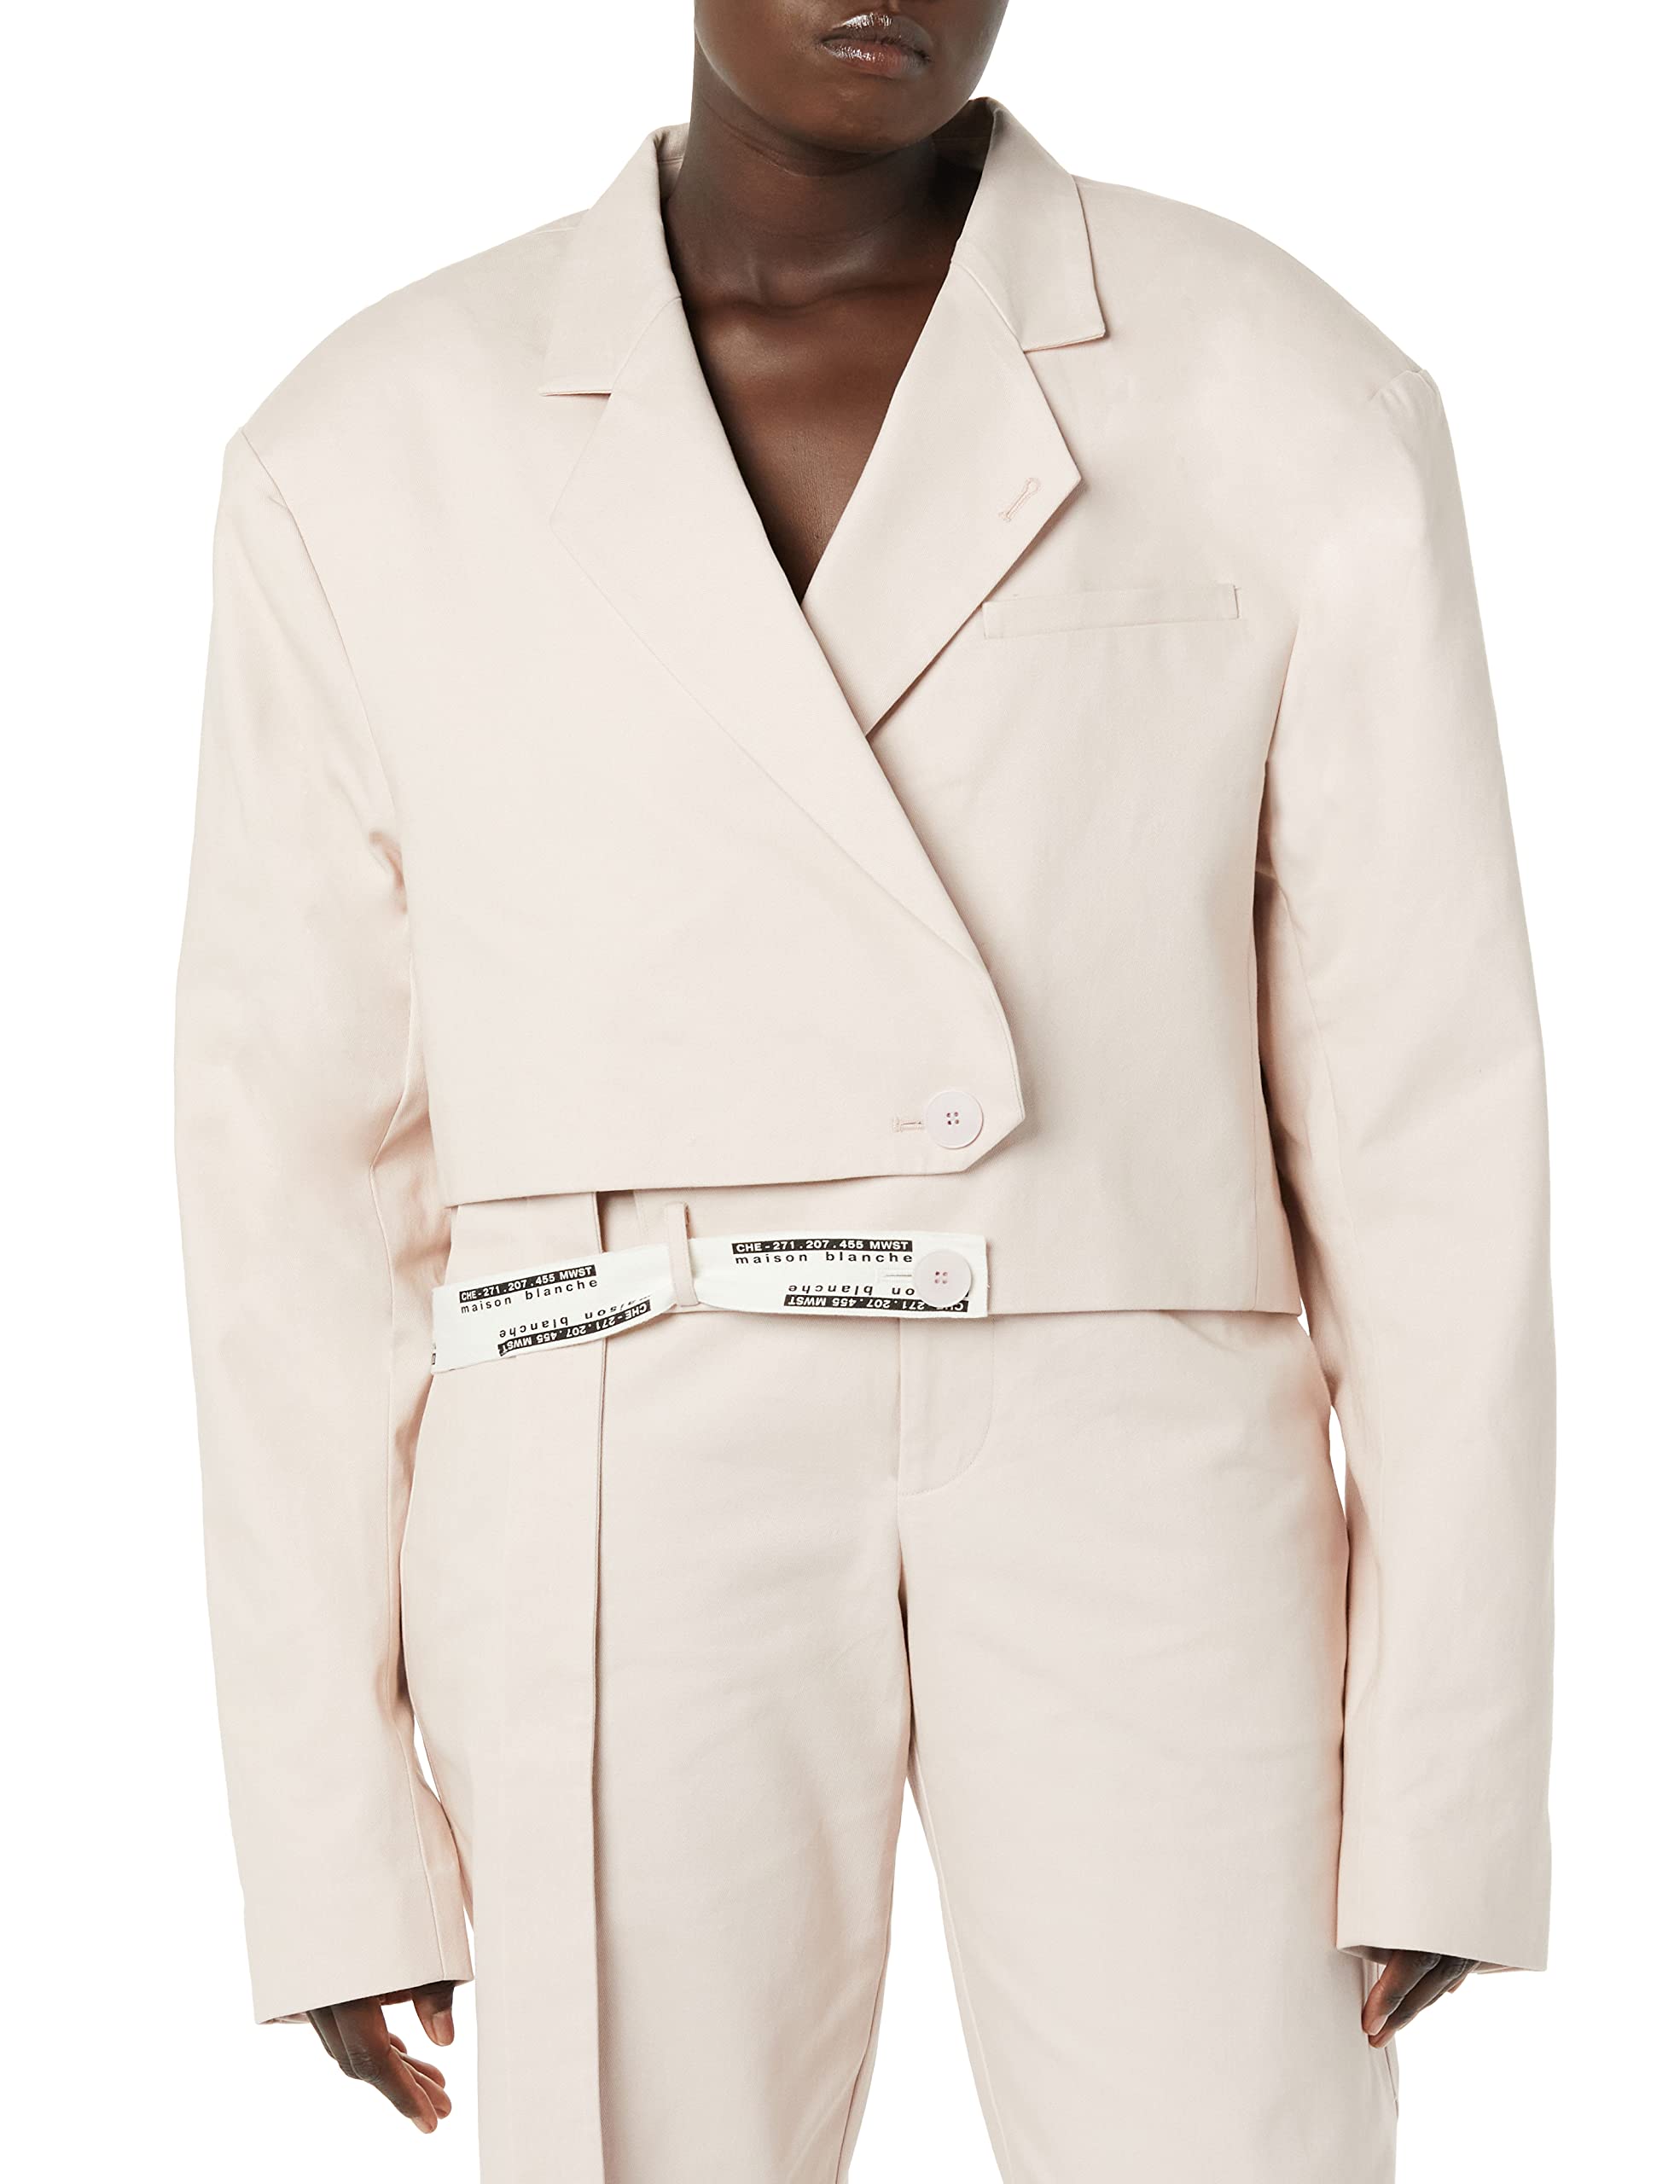 All Gender Cropped Jacket by Maison Blanche, XXL, $18.95 at Amazon.com